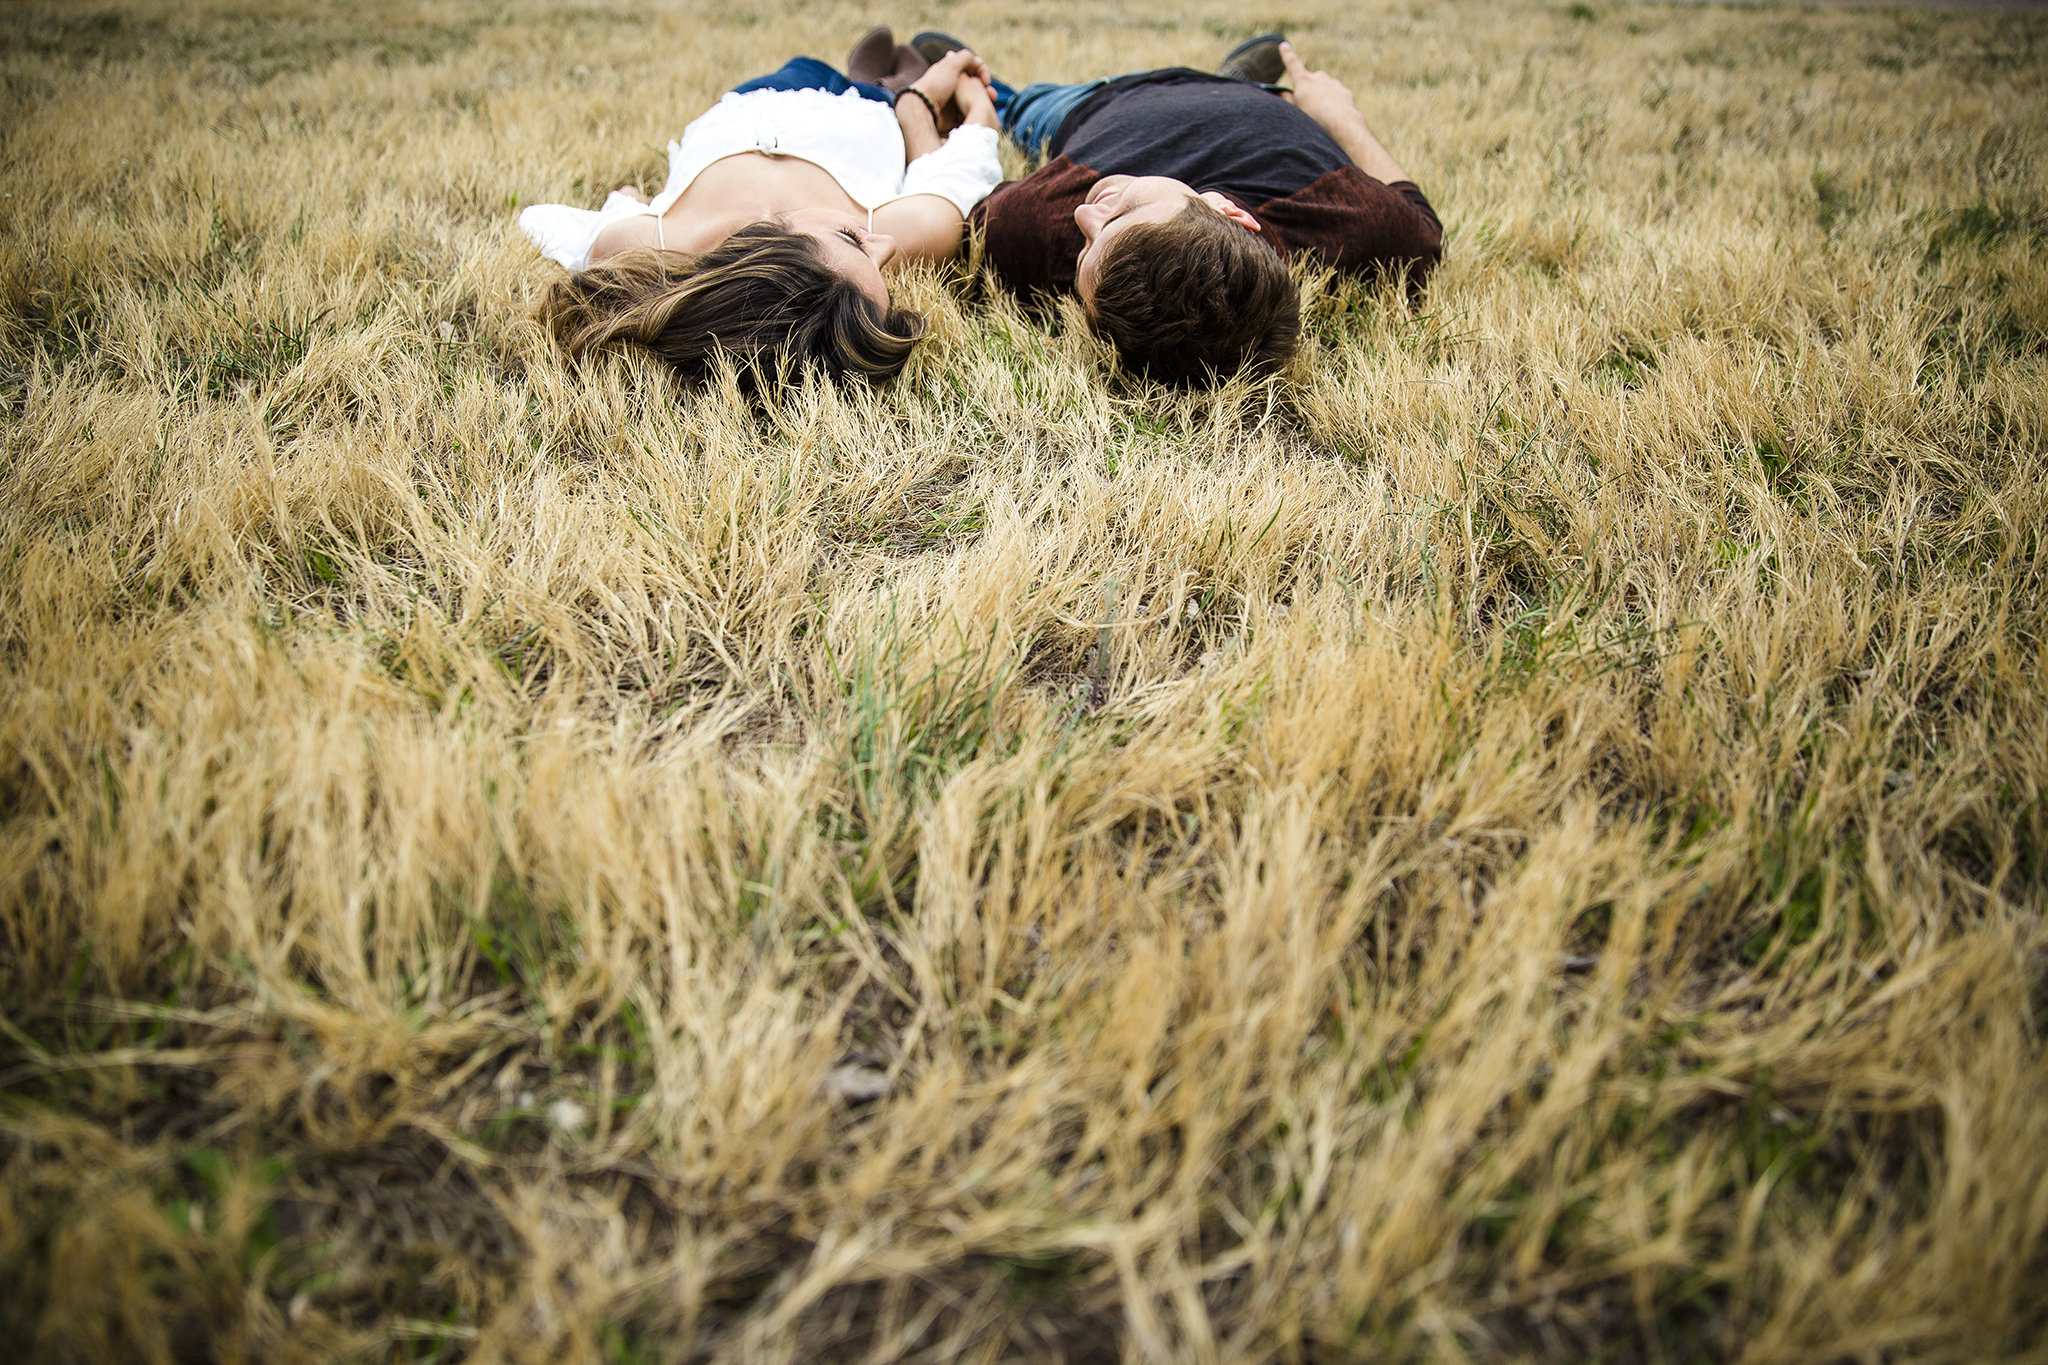 laying in the grass, romantic, holding hands, creative engagement photography